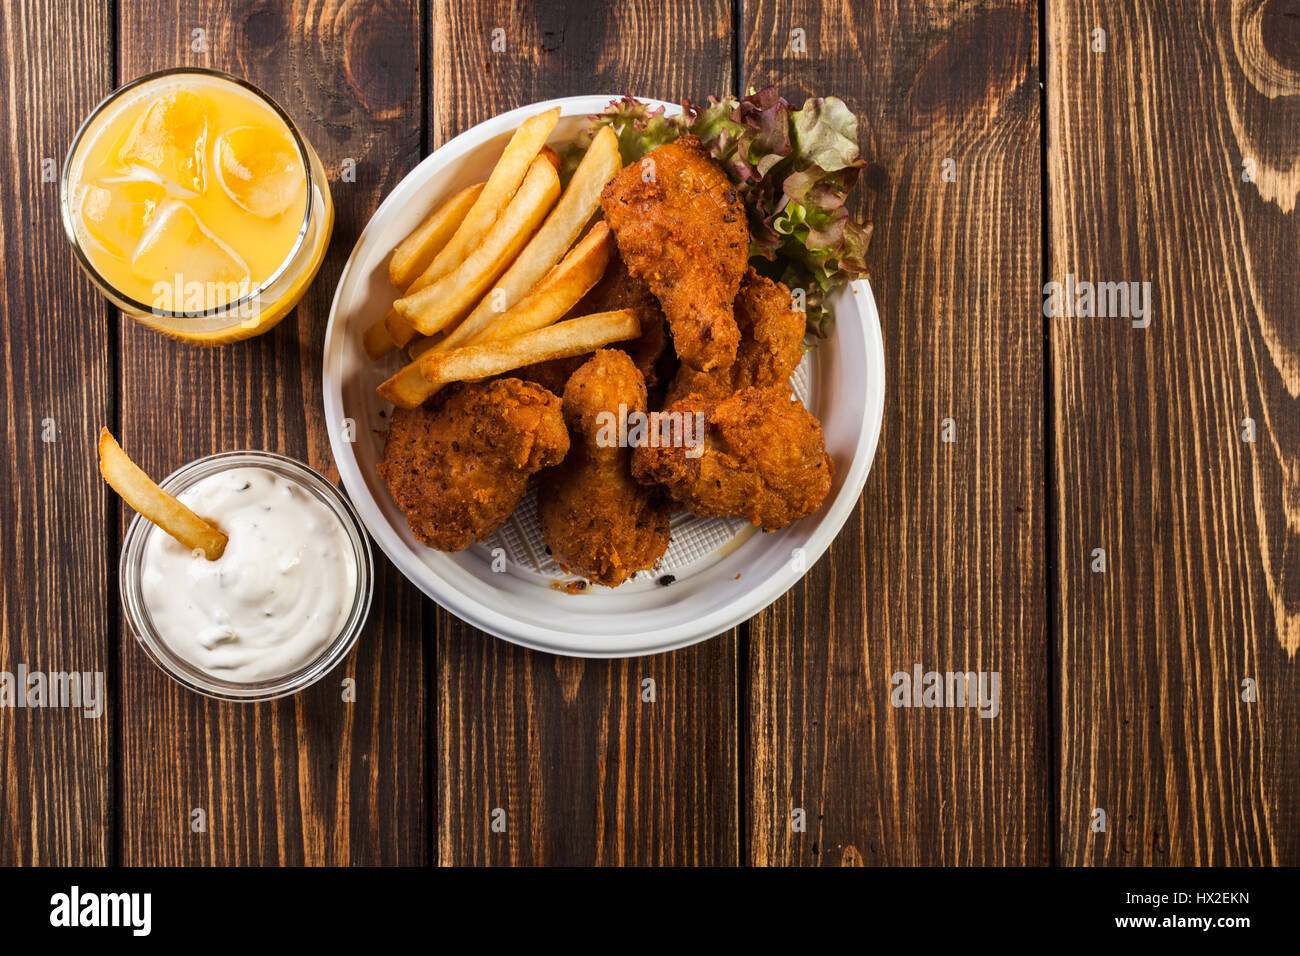 Crisp crunchy golden chicken wings with chips Stock Photo